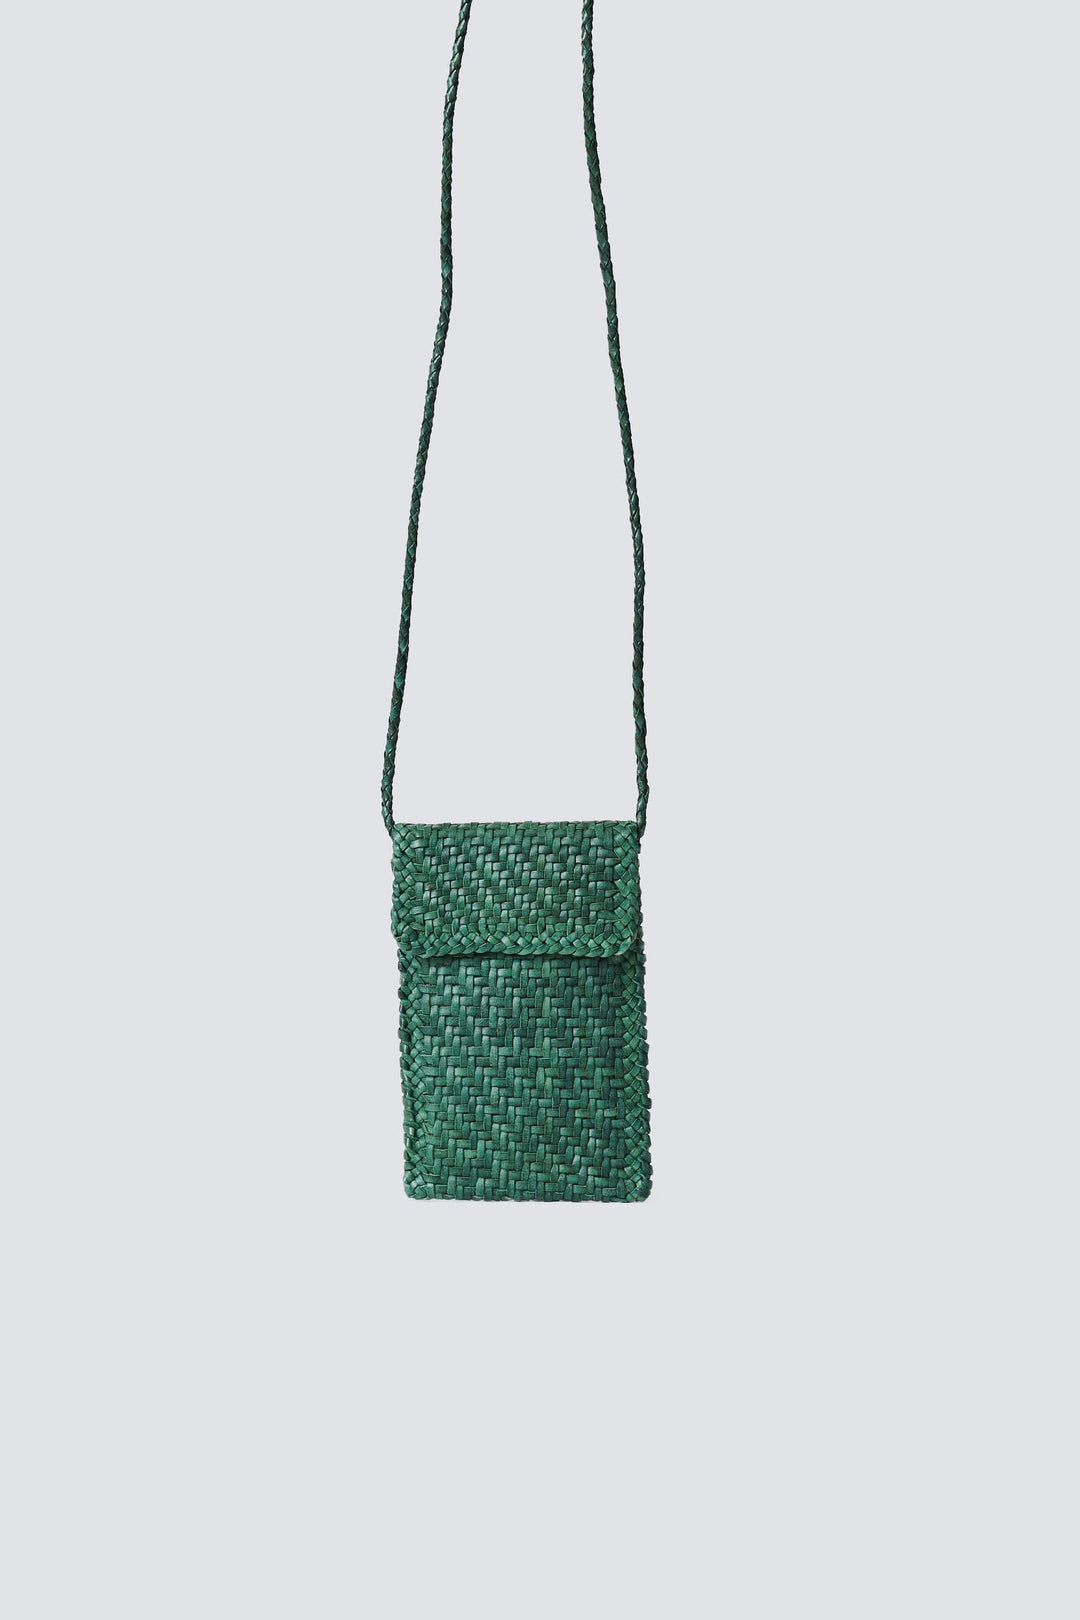 Dragon Diffusion woven leather bag handmade - Phone Crossbody Forest Green